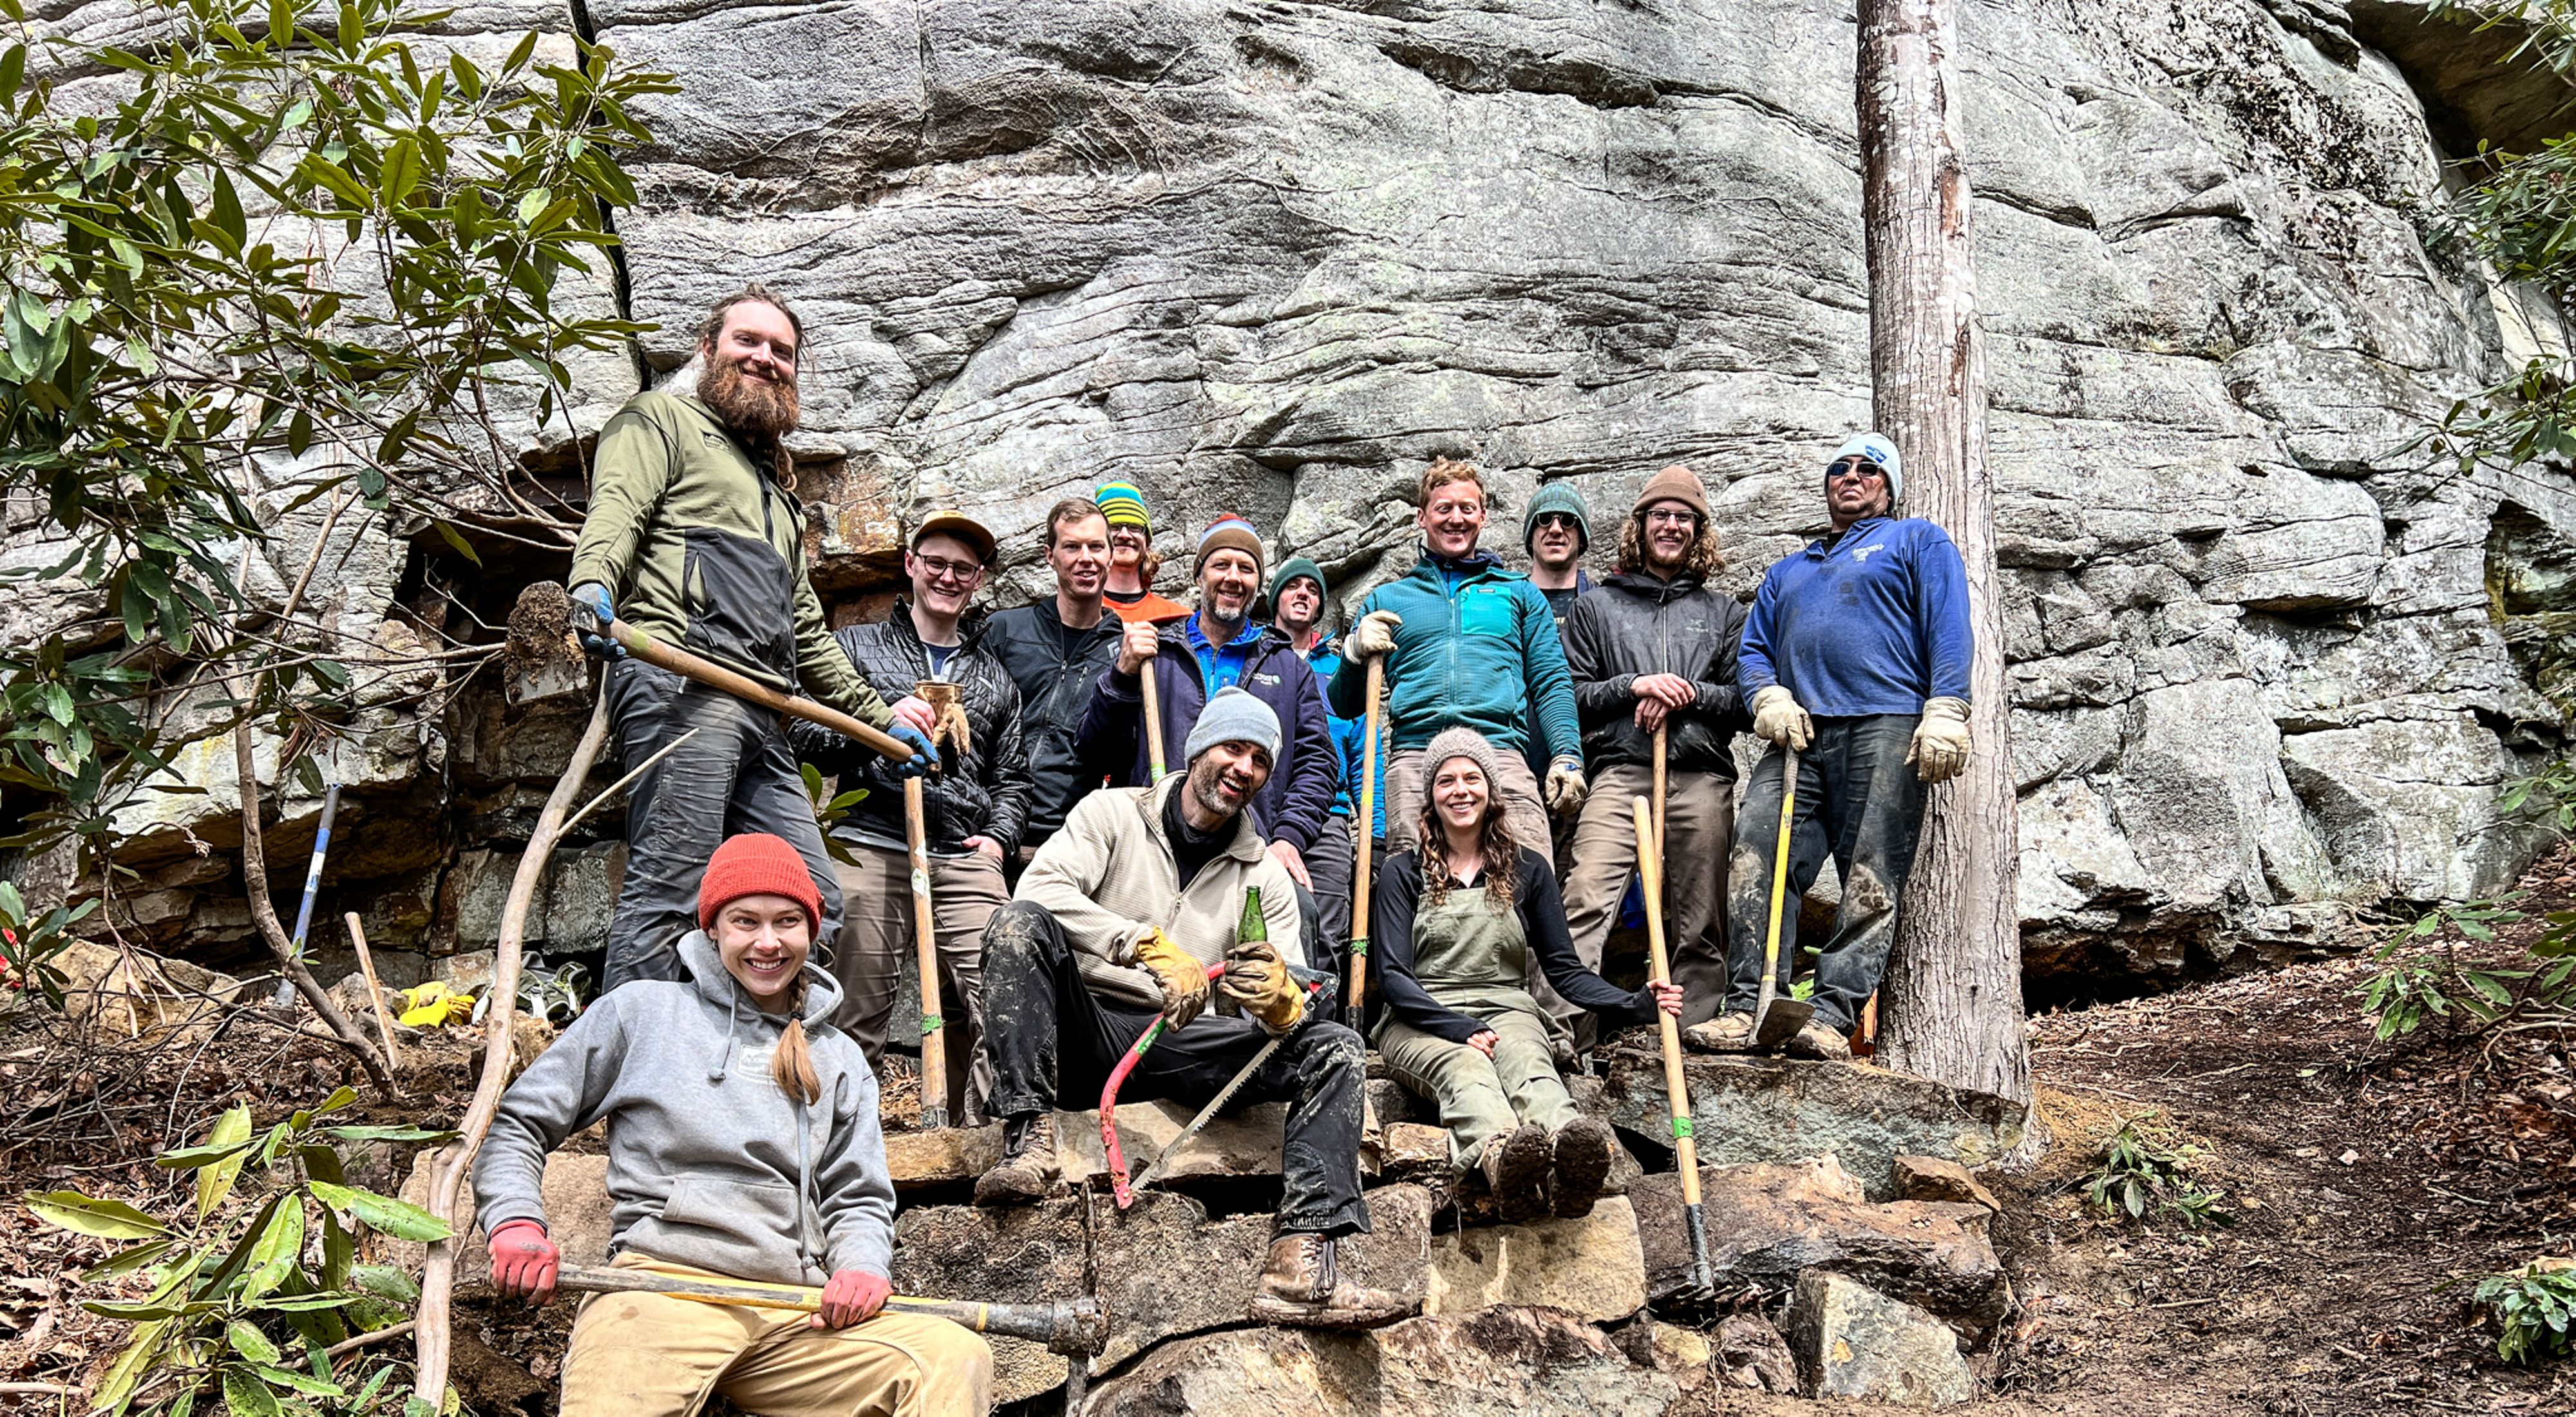 A large group of people pose together in front of a rock wall. They hold loppers and other hand tools for clearing brush and small vegetation.